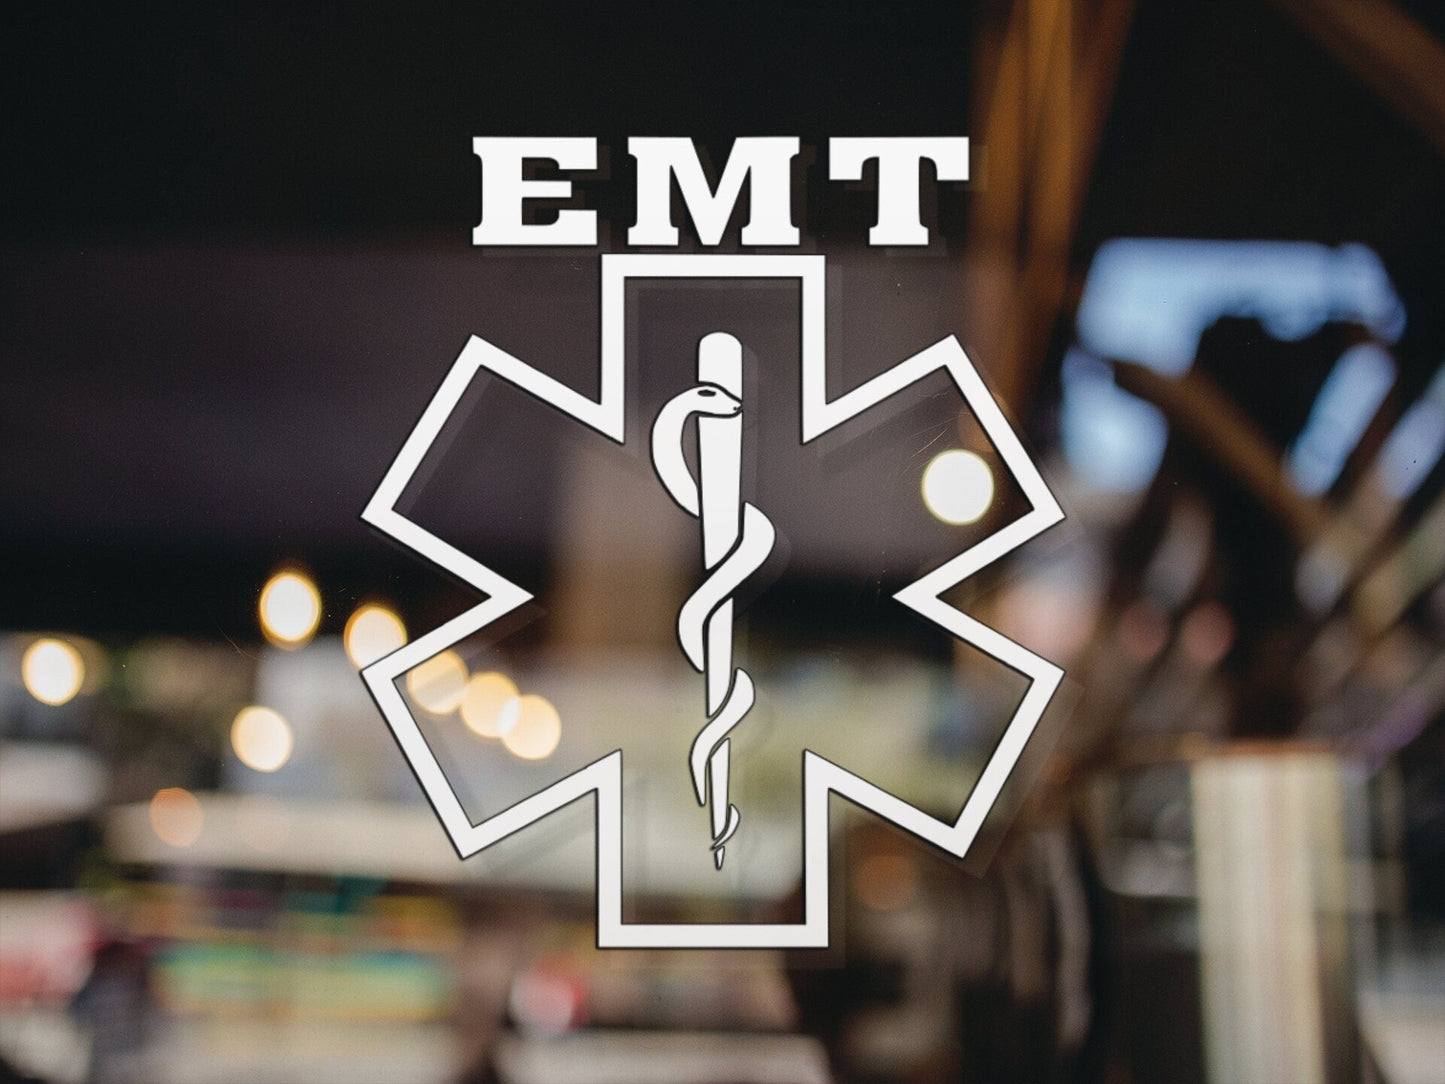 EMT Decal - Many Colors & Sizes